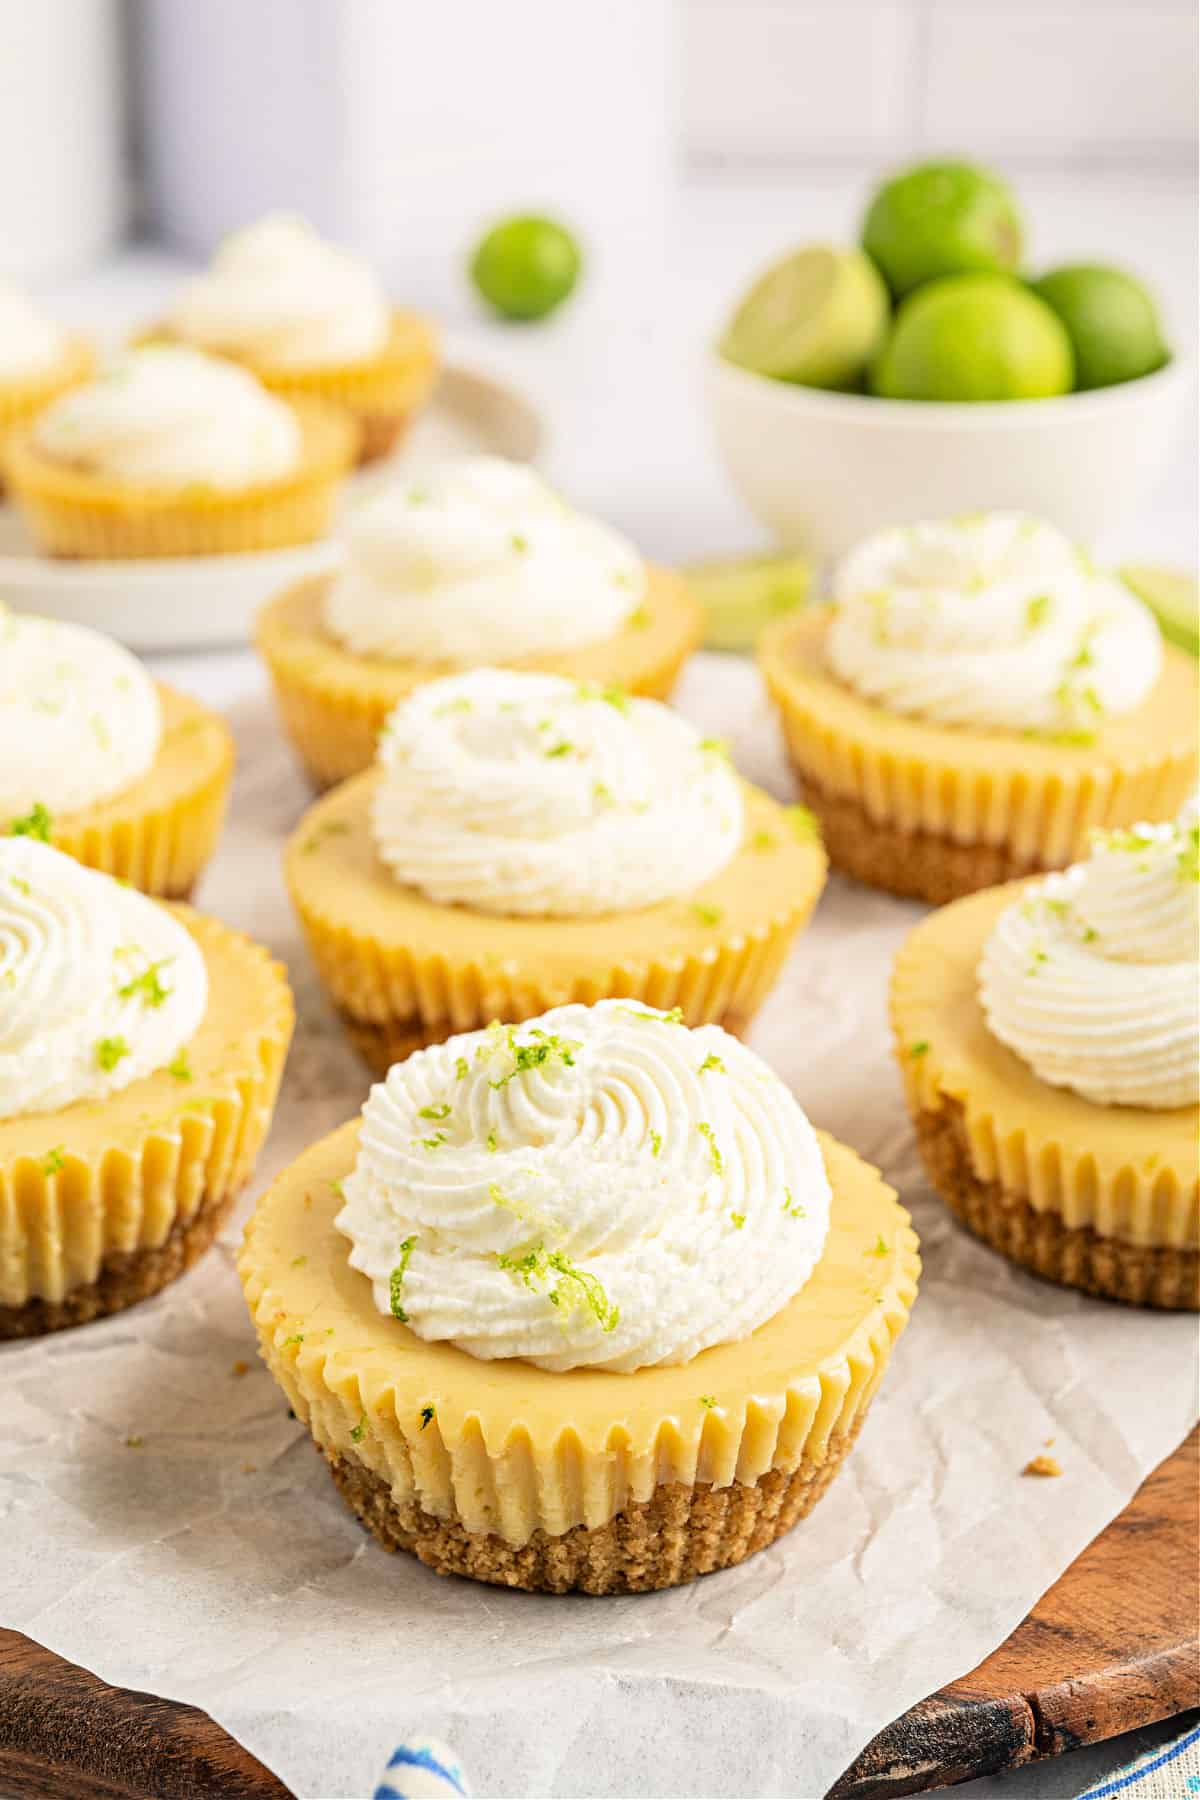 Mini key lime pies on a parchment paper lined serving board.